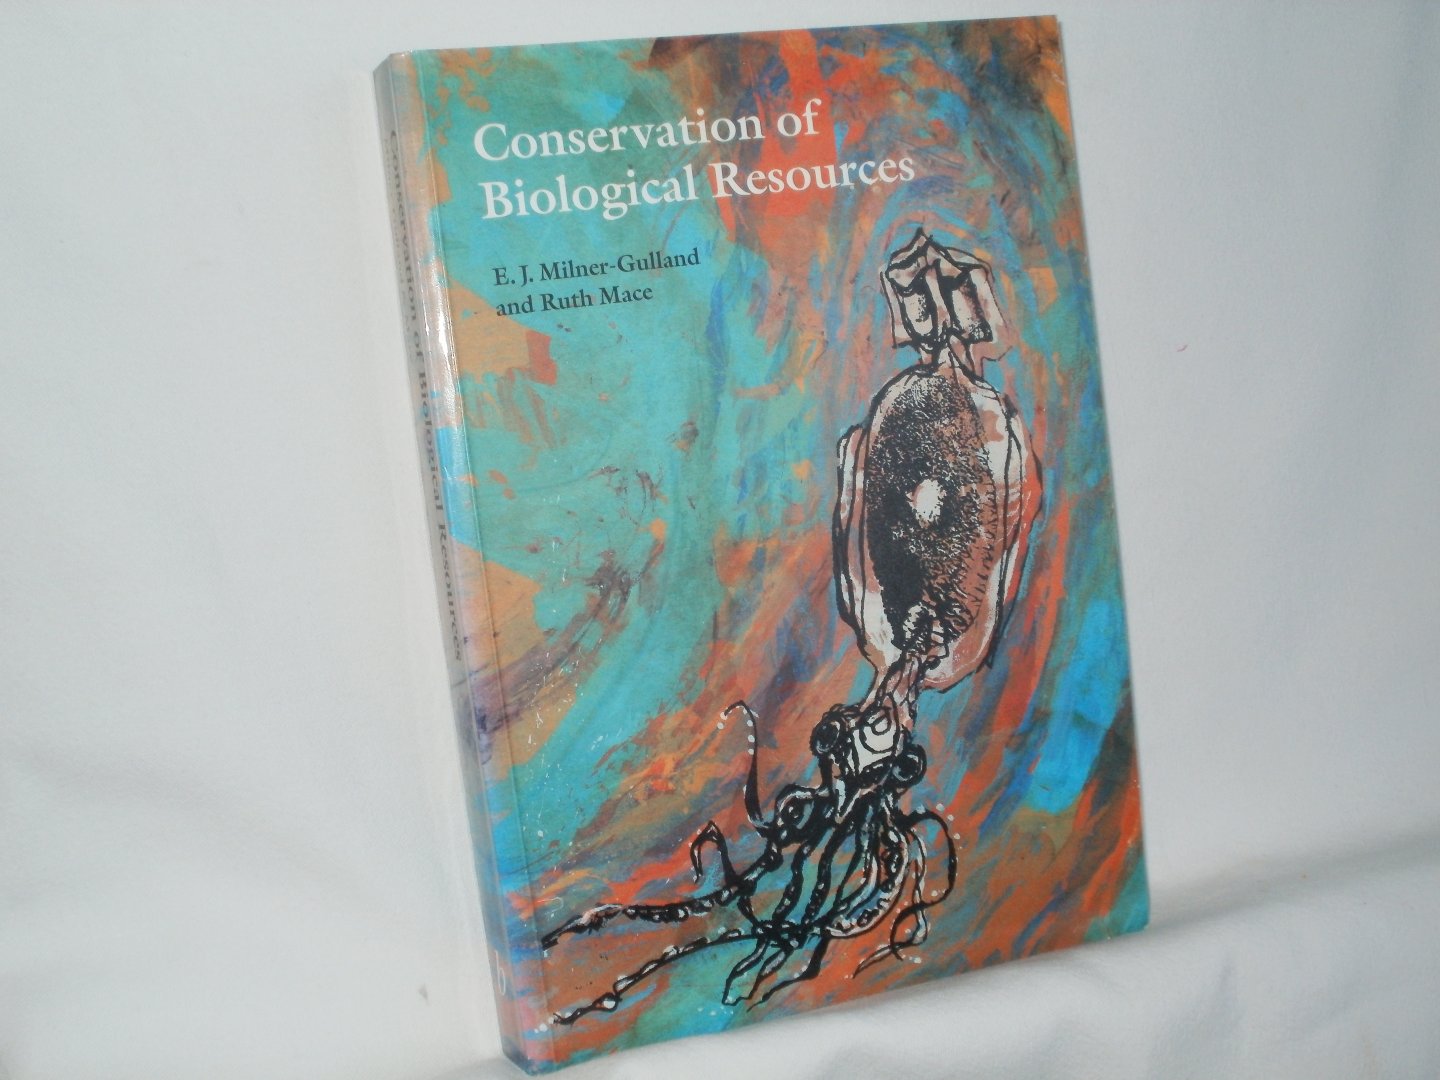 Milner-Gulland, E.J.; Mace, Ruth - Conservation of Biological Resources. With case studies contributed by other authors